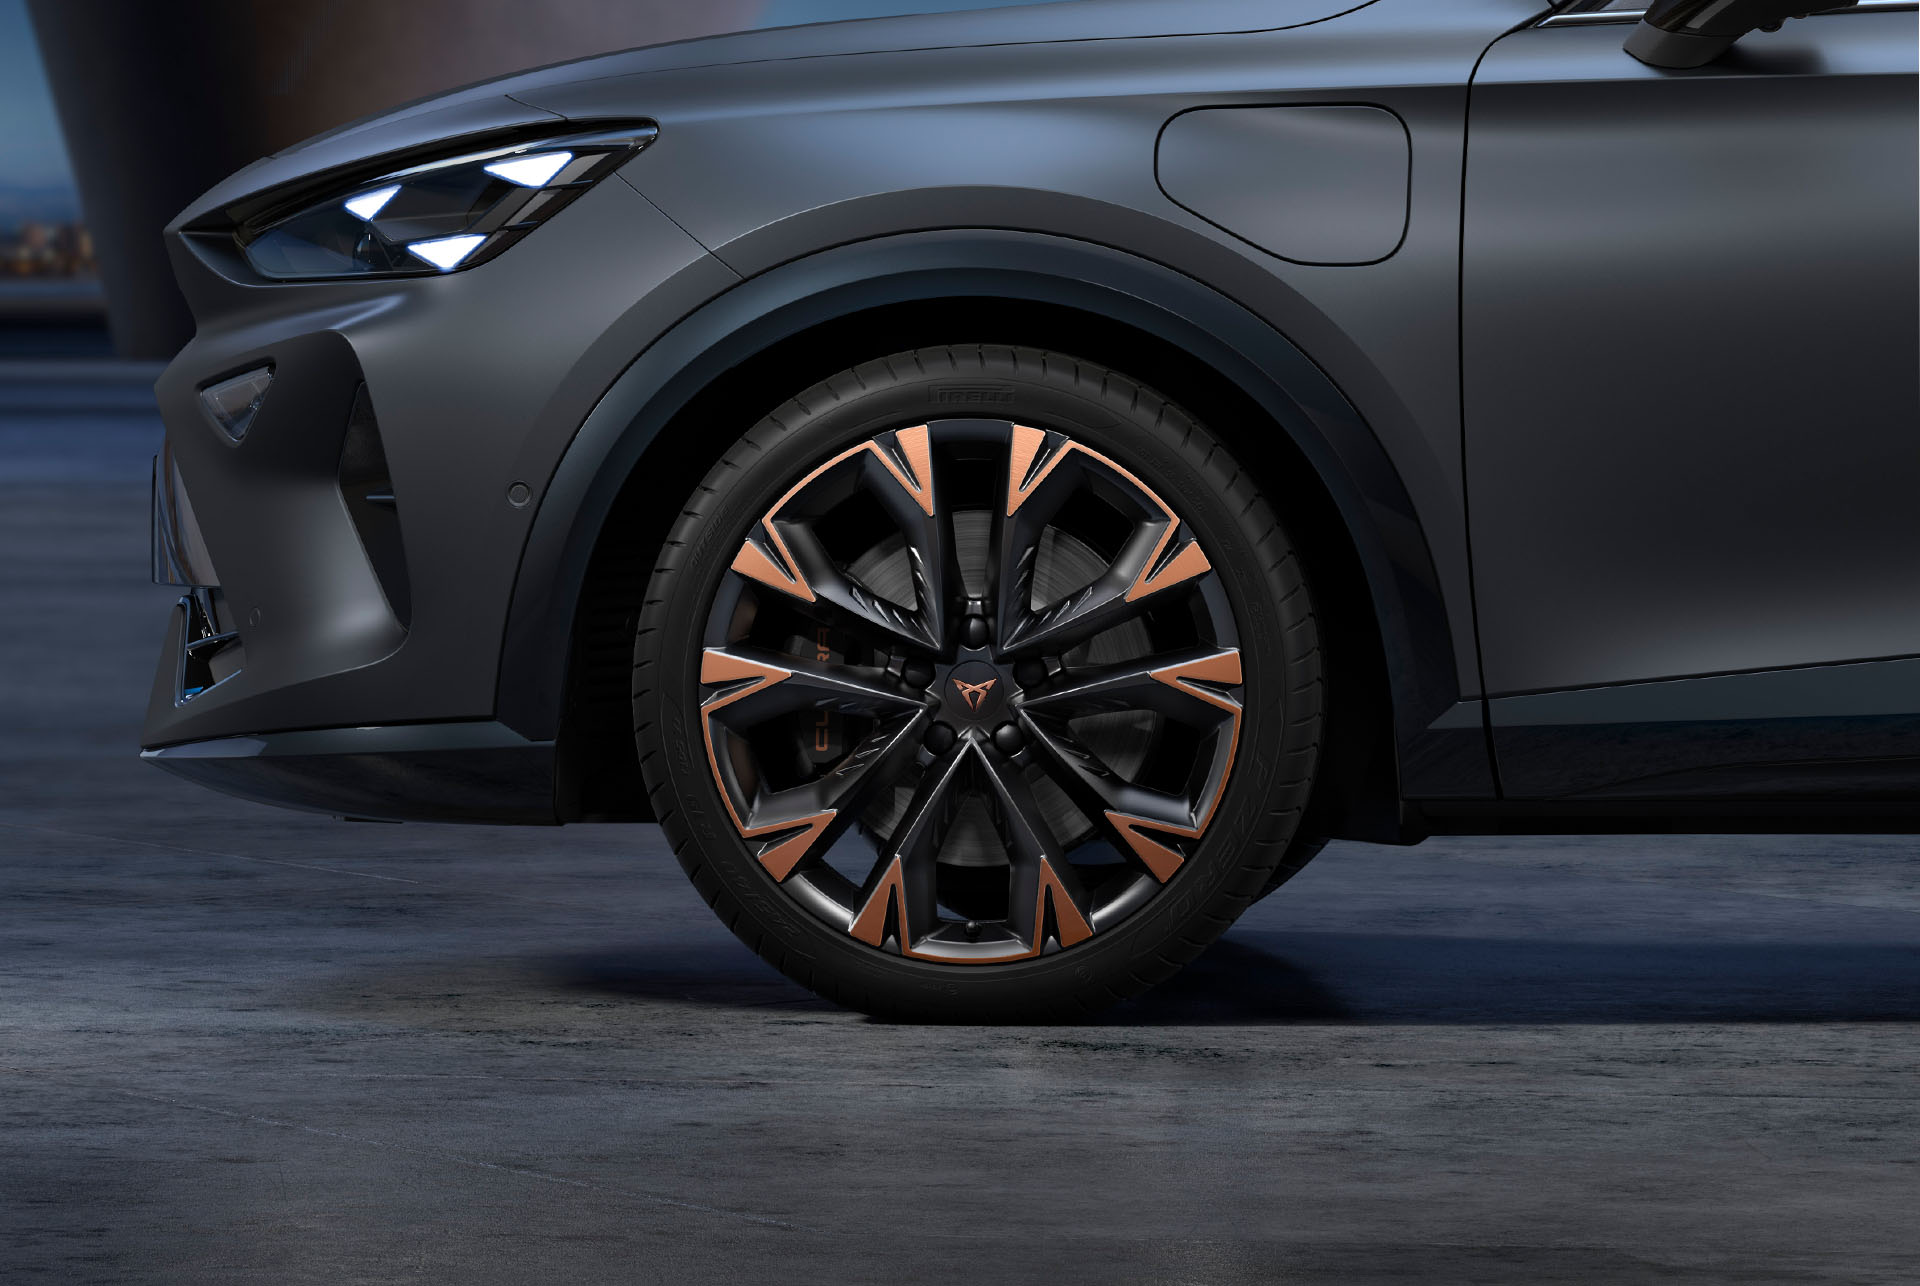 New artic copper and black CUPRA Formentor 2024 car wheels, alloys and tyres with logo in the middle, LED headlights.